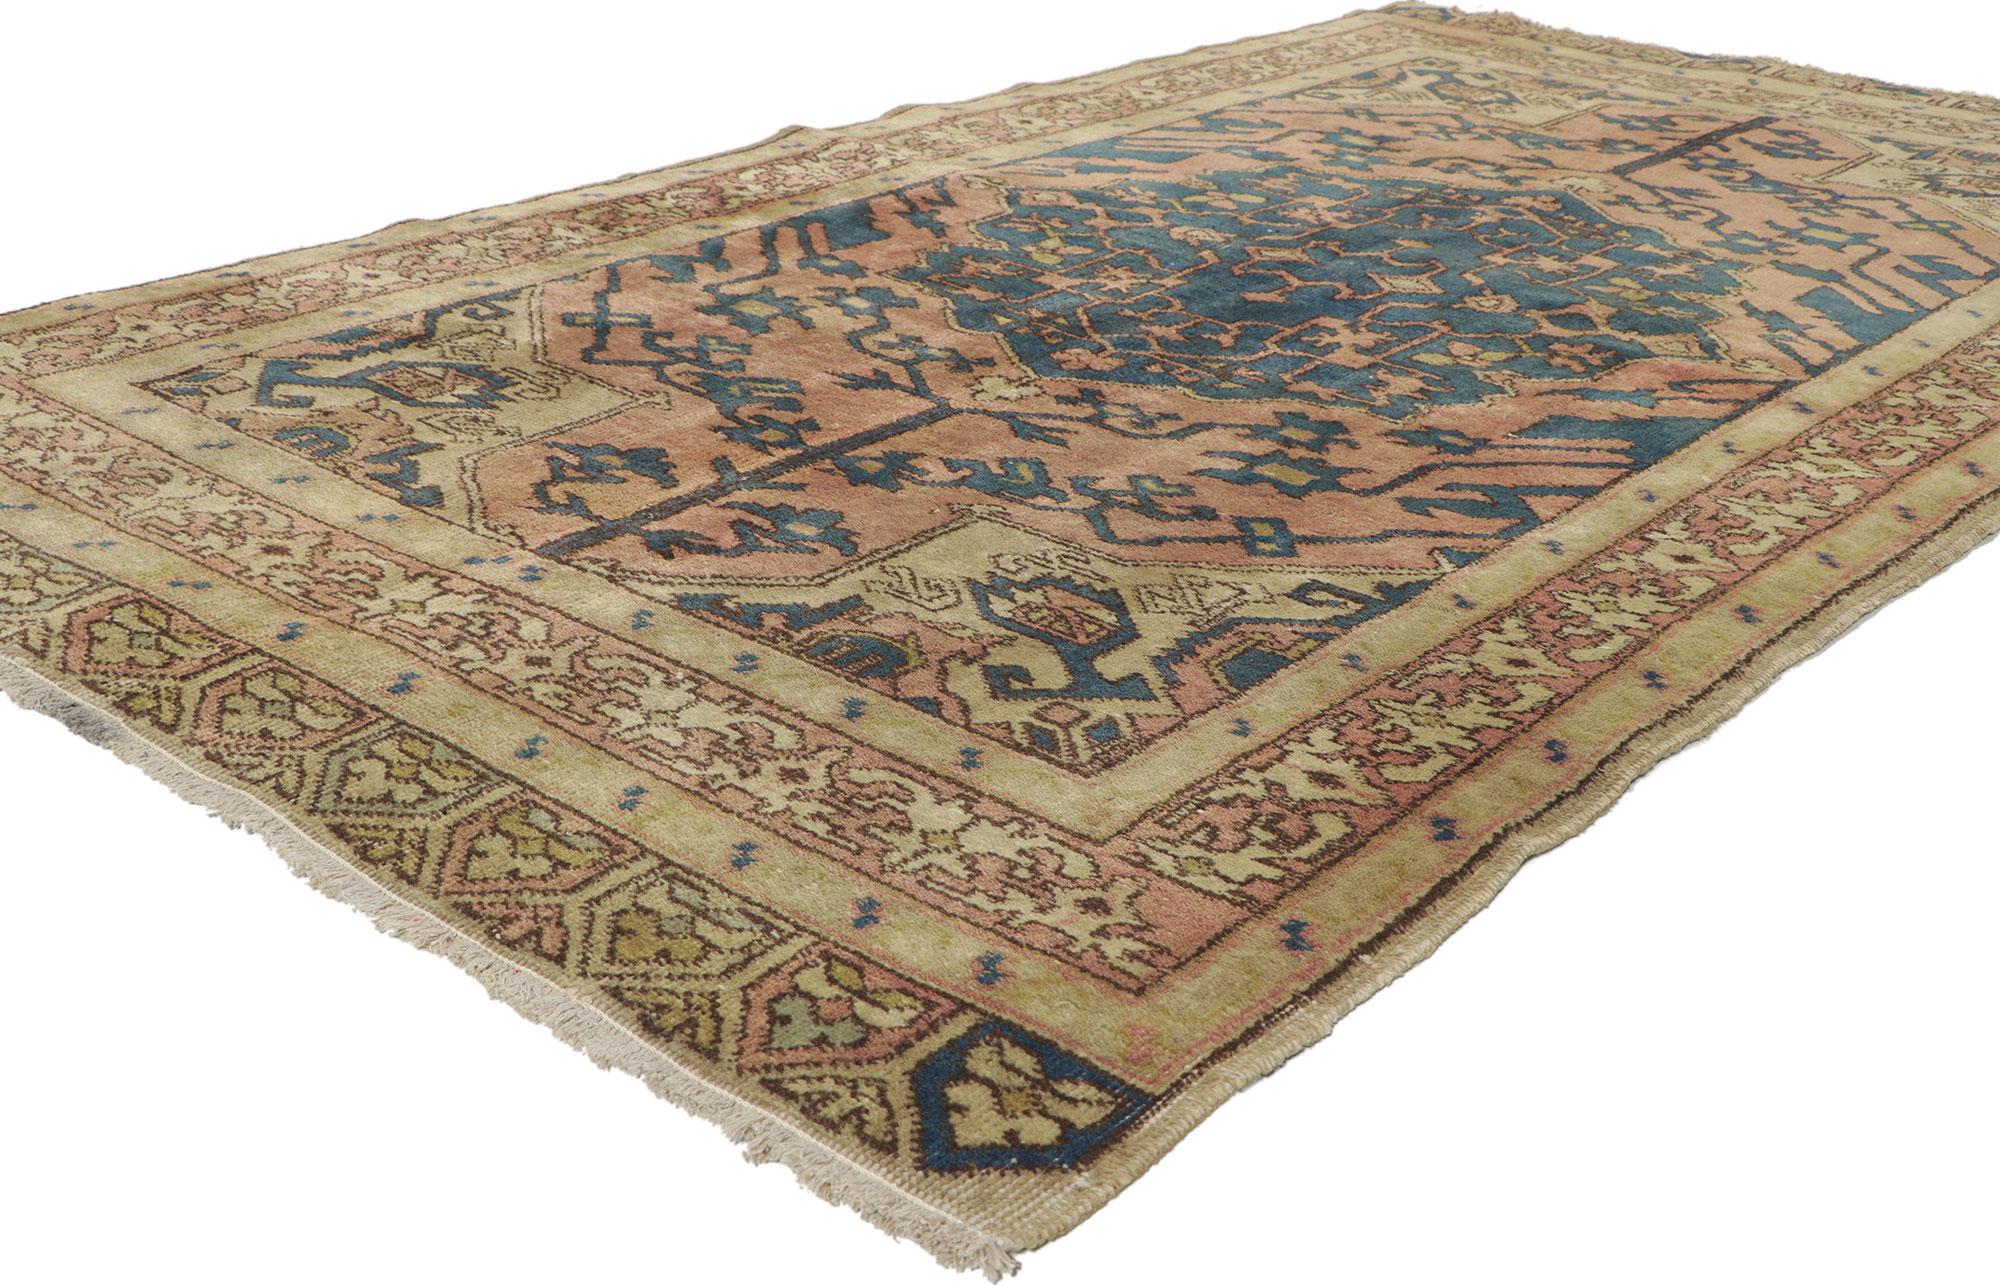 Hand-Knotted Pair of Matching Vintage Turkish Sivas Rugs with Rustic Earth-Tone Colors For Sale